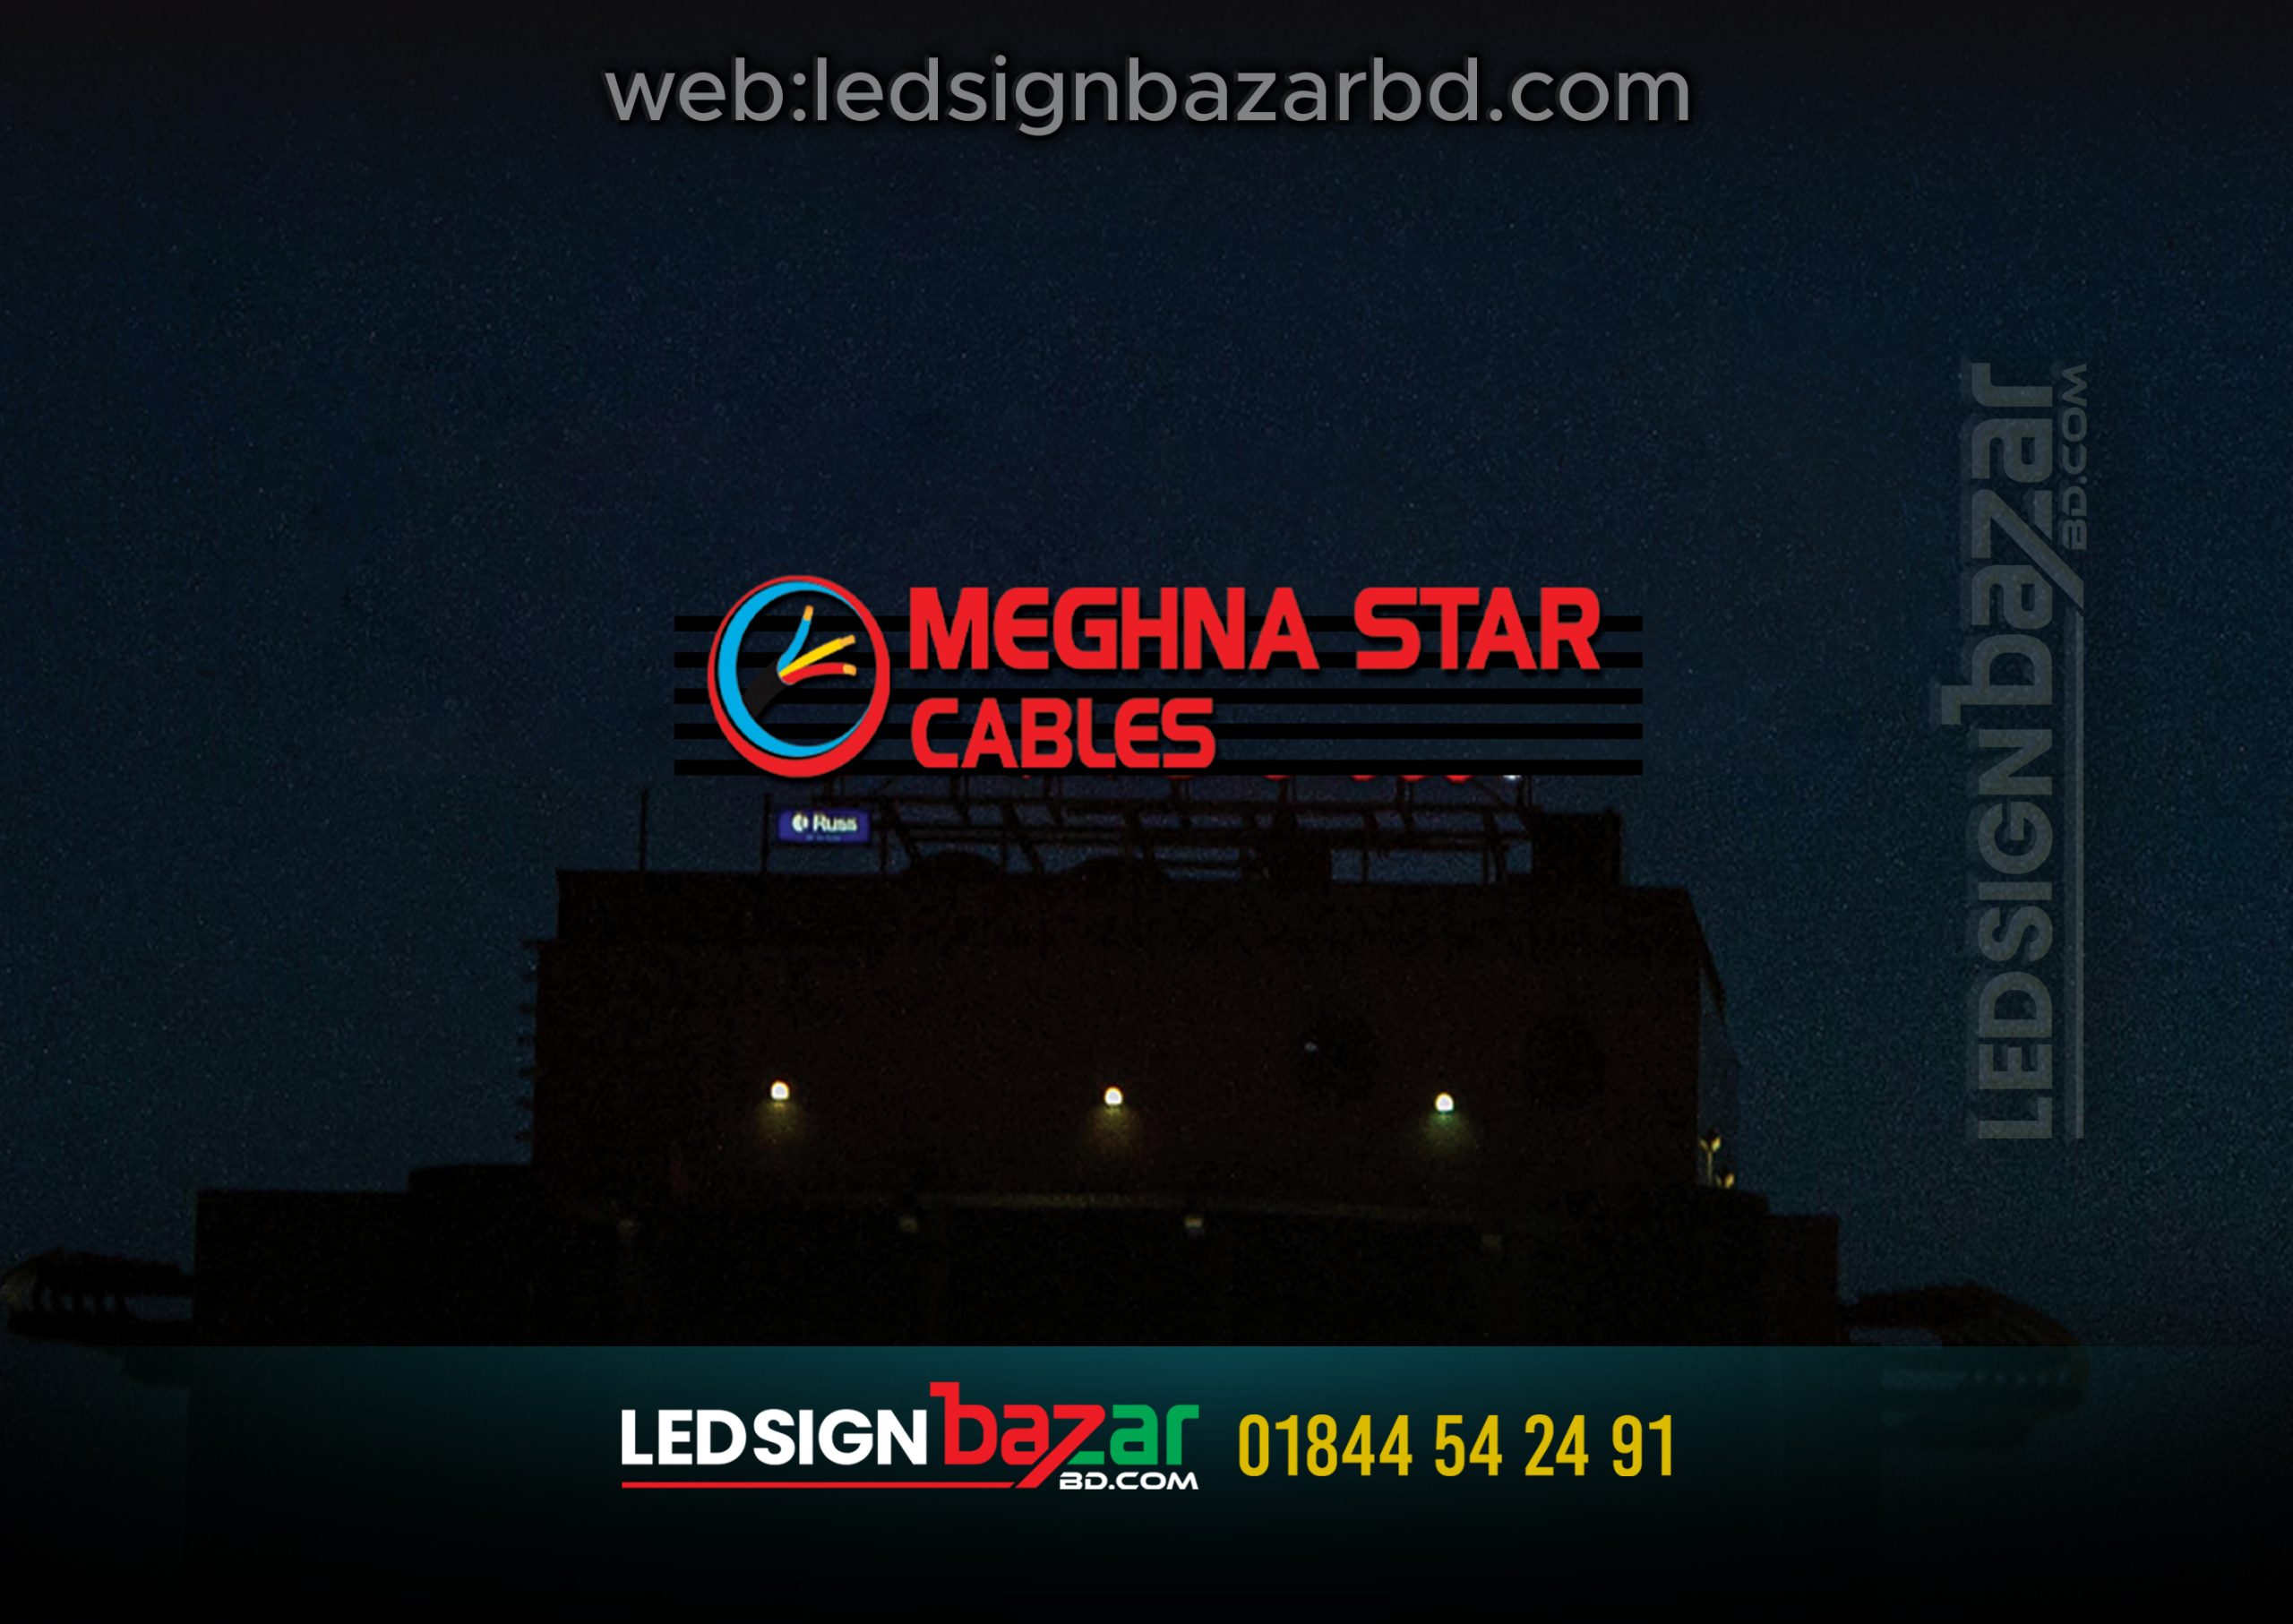 MEGHNA STAR CABLES ACRYLIC LIGHTING LOGO SIGNS BD, SIGNBOARD BD, BILLBOARD ADS BD, LED SIGN BD, NEON SIGNS BD